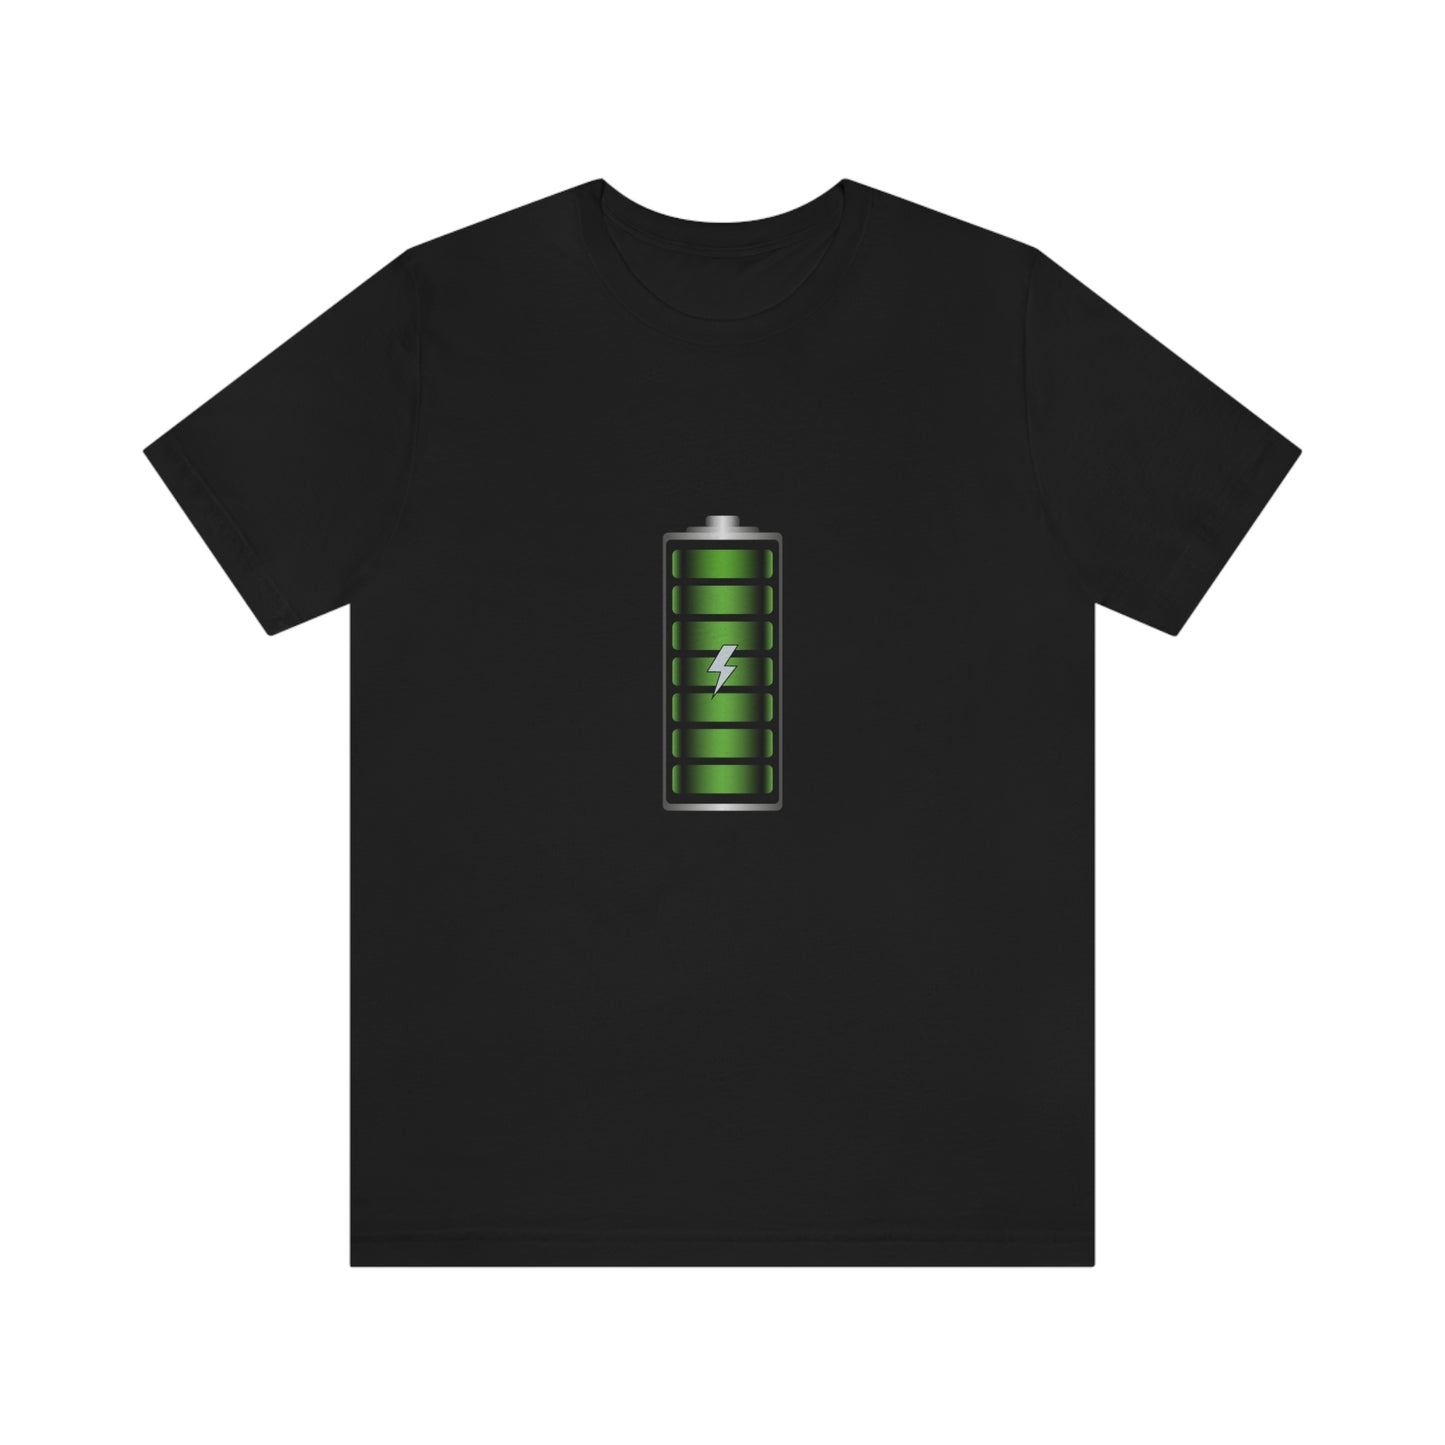 Black T-Shirt featuring a green and chrome 'battery' design from the TEQNEON Radioactive collection, named FULLY CHARGED